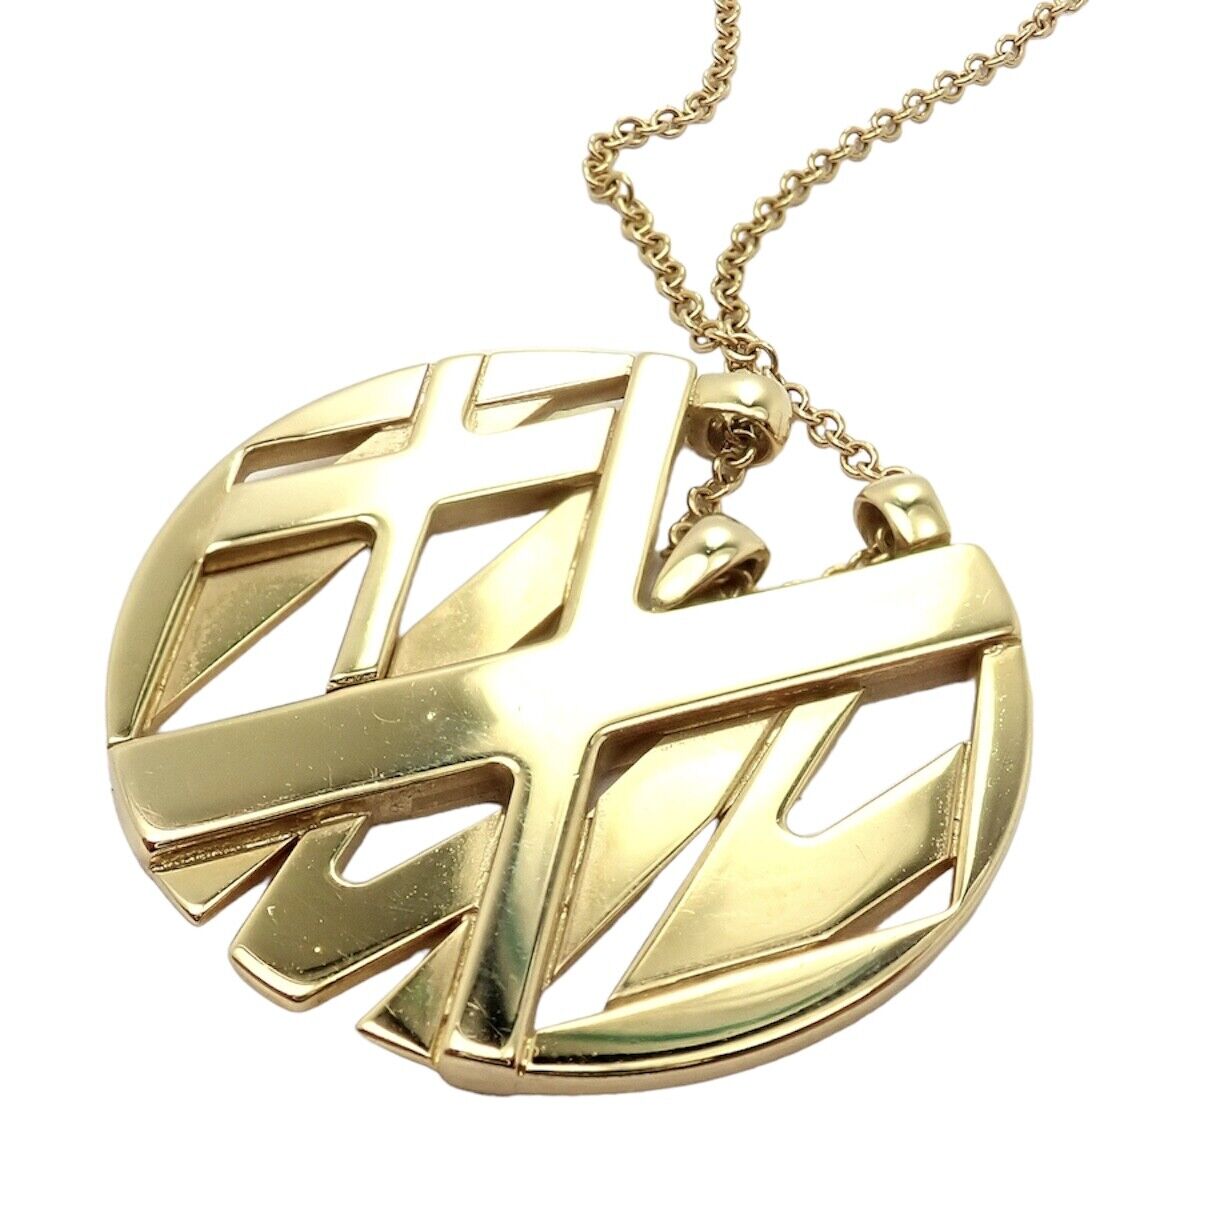 Tiffany & Co. Jewelry & Watches:Fine Jewelry:Necklaces & Pendants Tiffany & Co 18k Yellow Gold Atlas Pendant Necklace